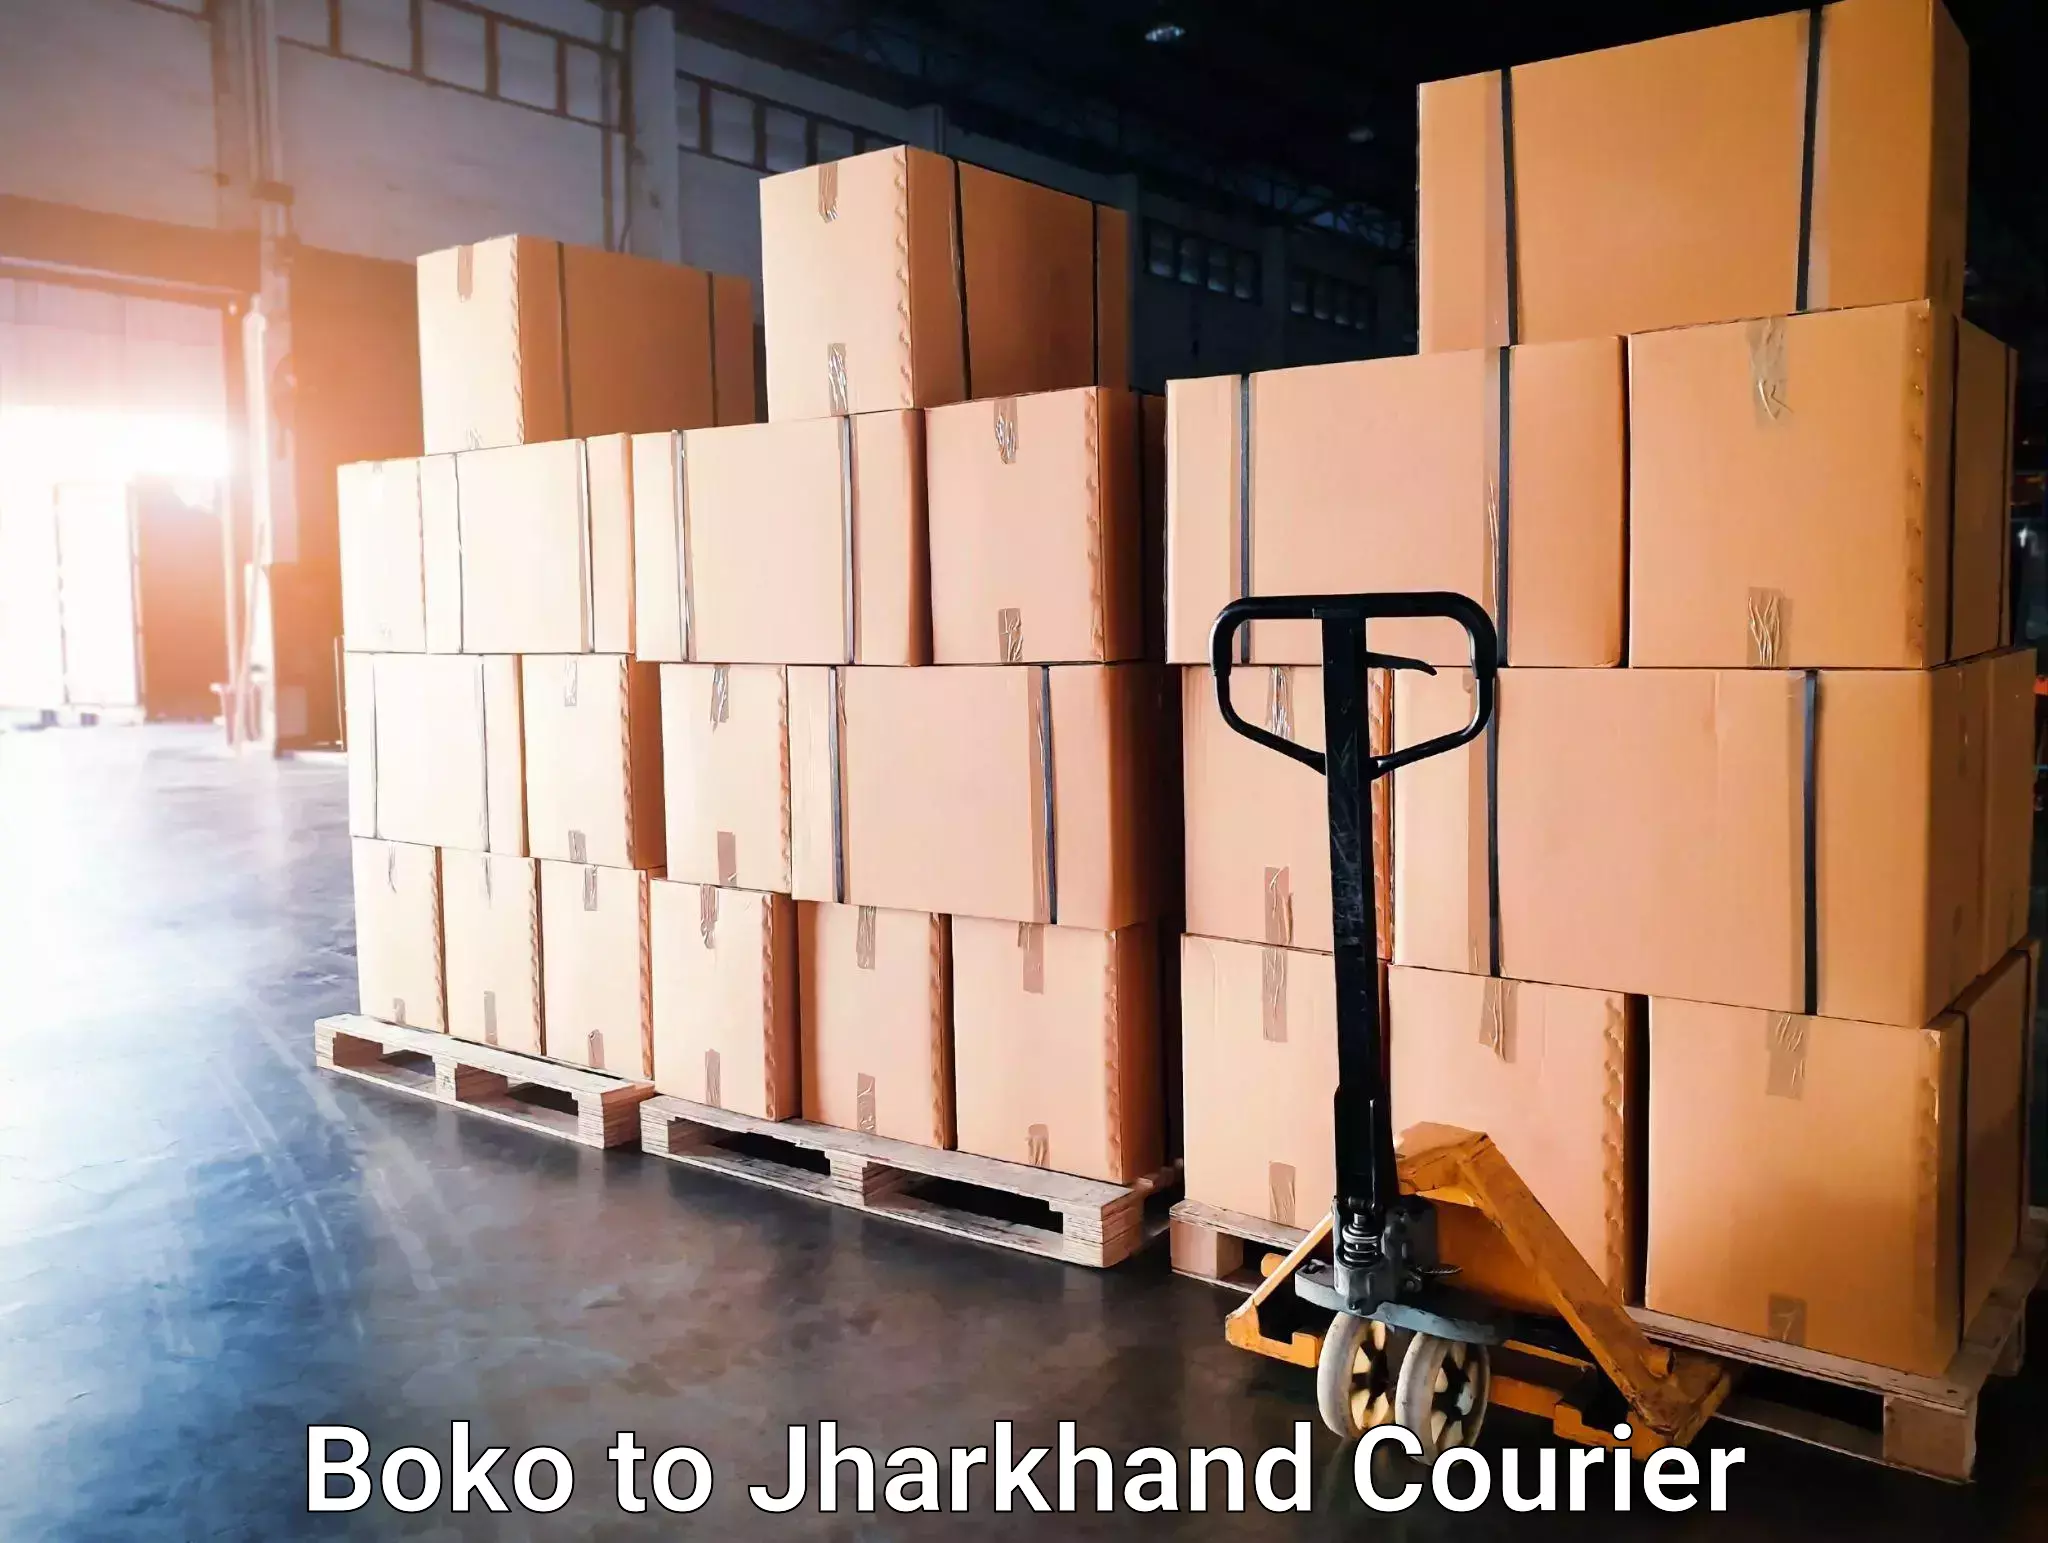 End-to-end delivery in Boko to Bagodar